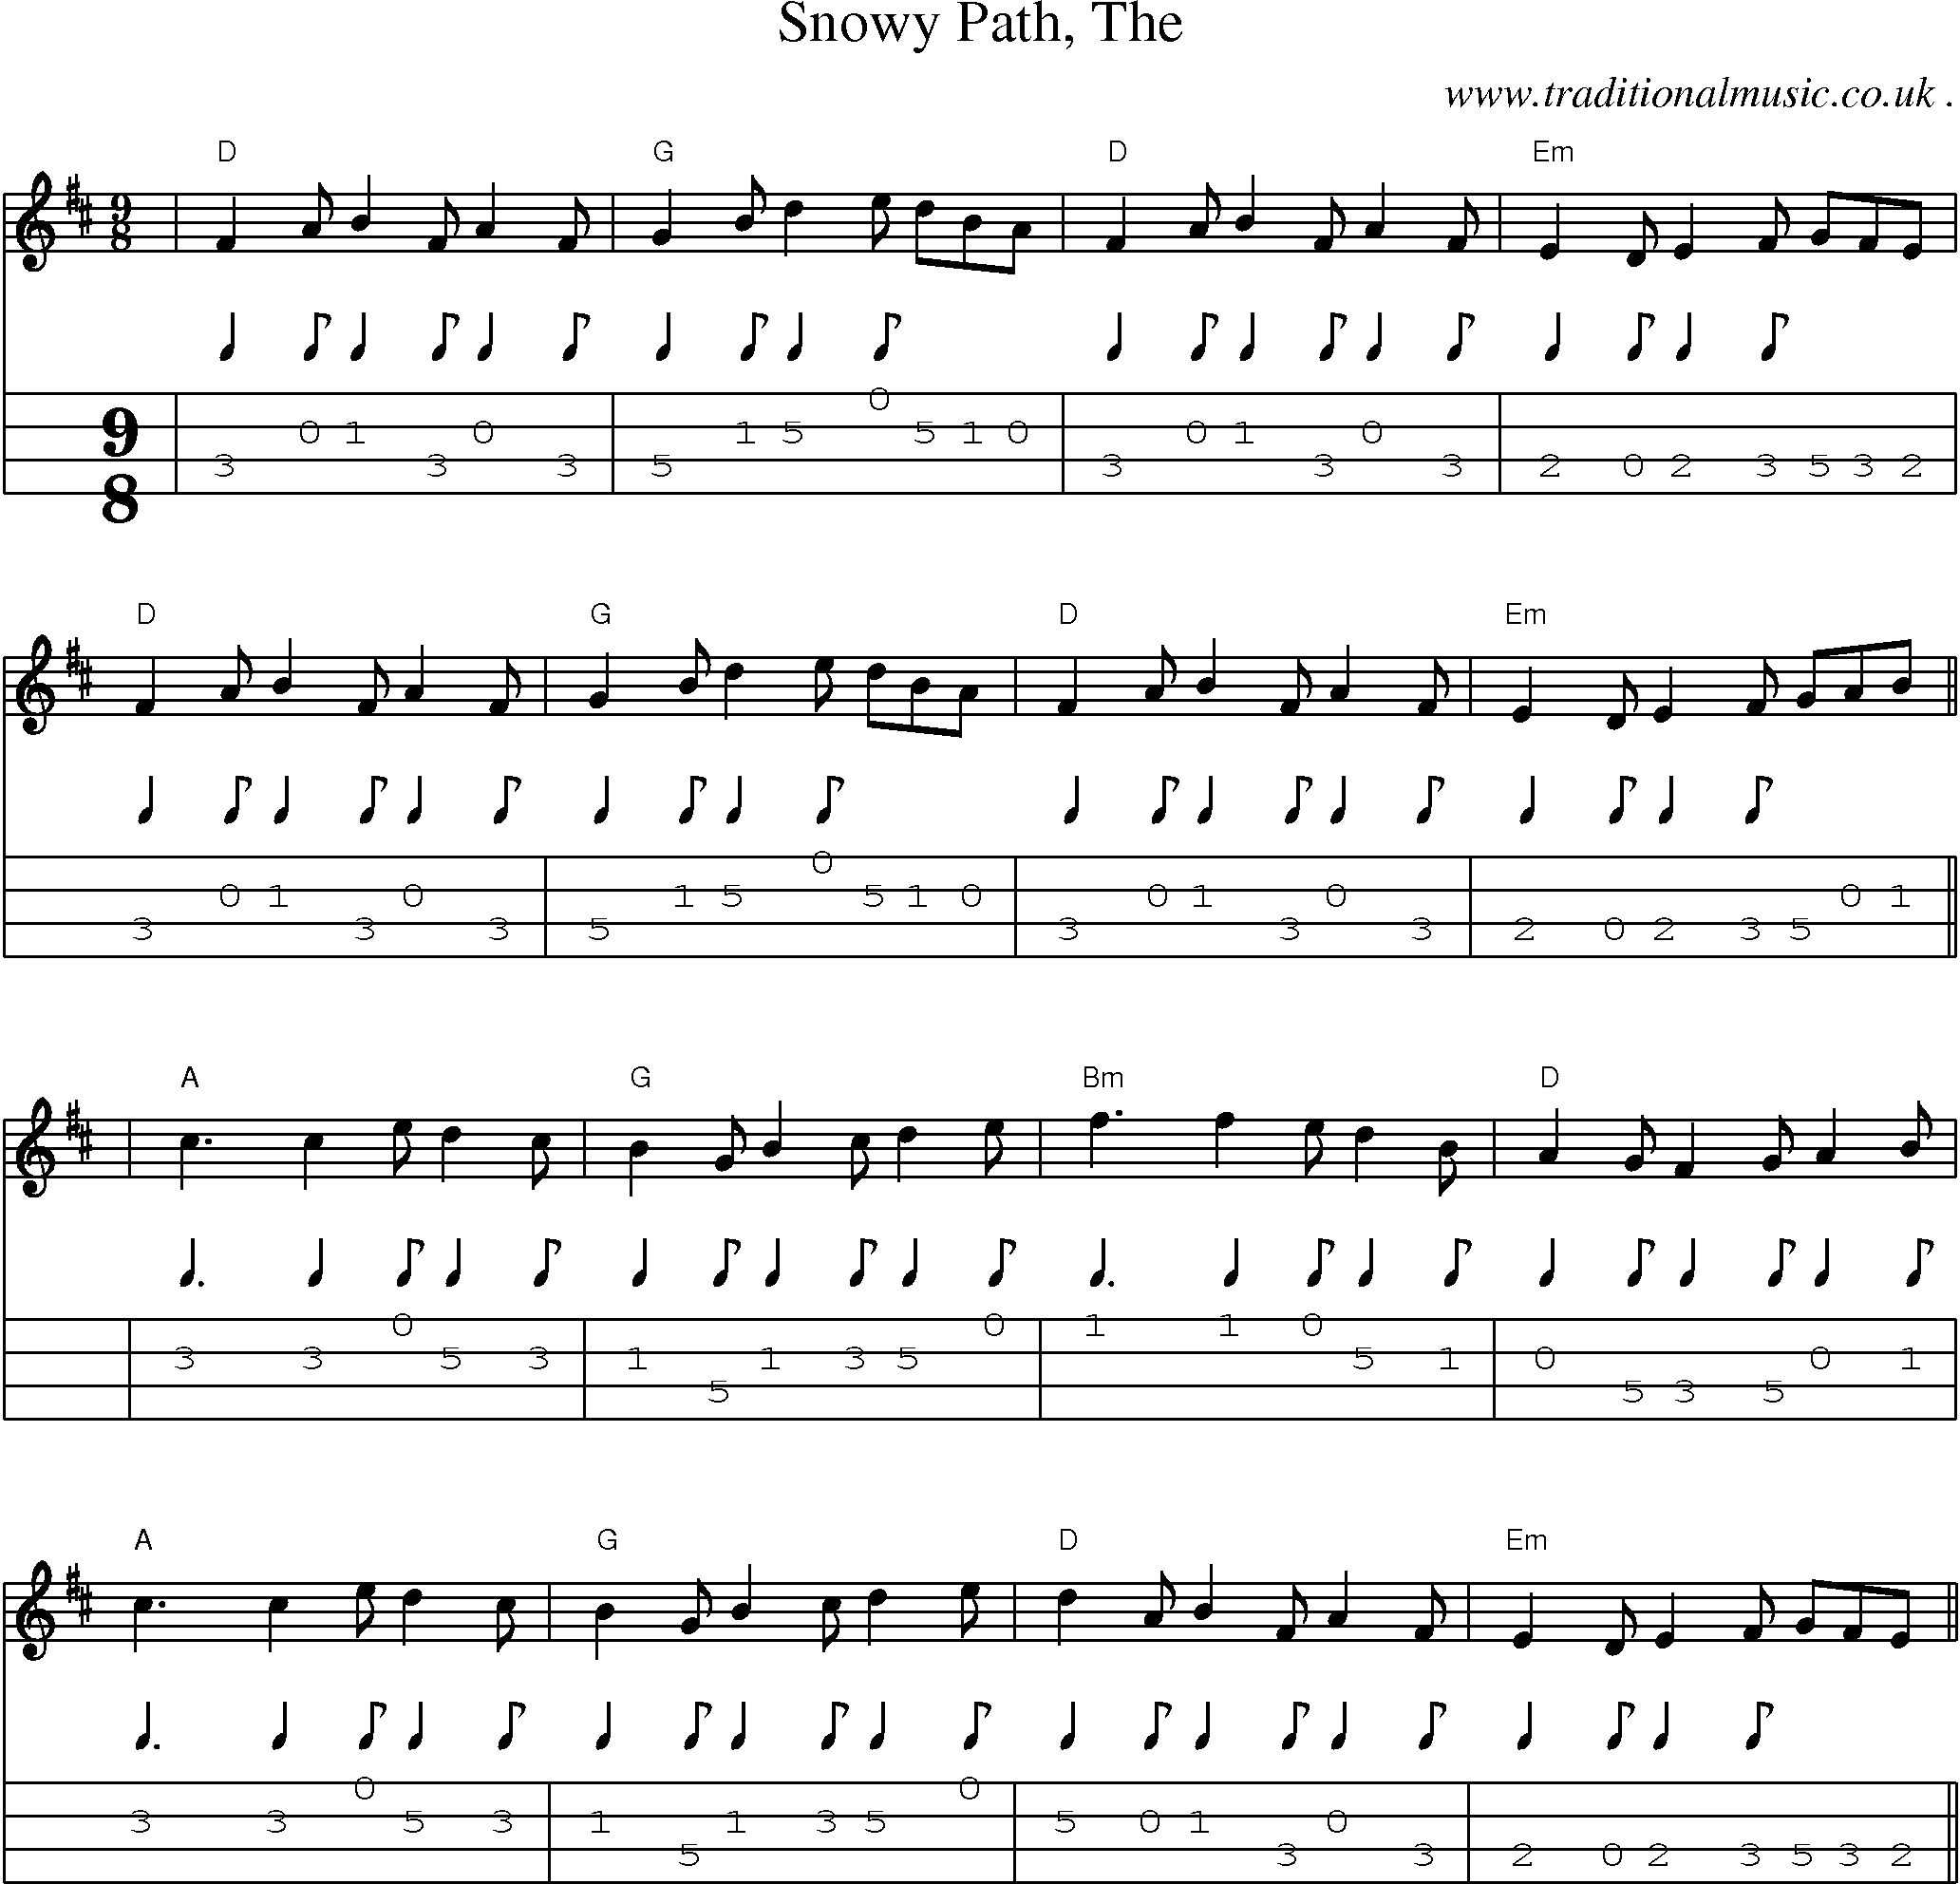 Music Score and Guitar Tabs for Snowy Path The